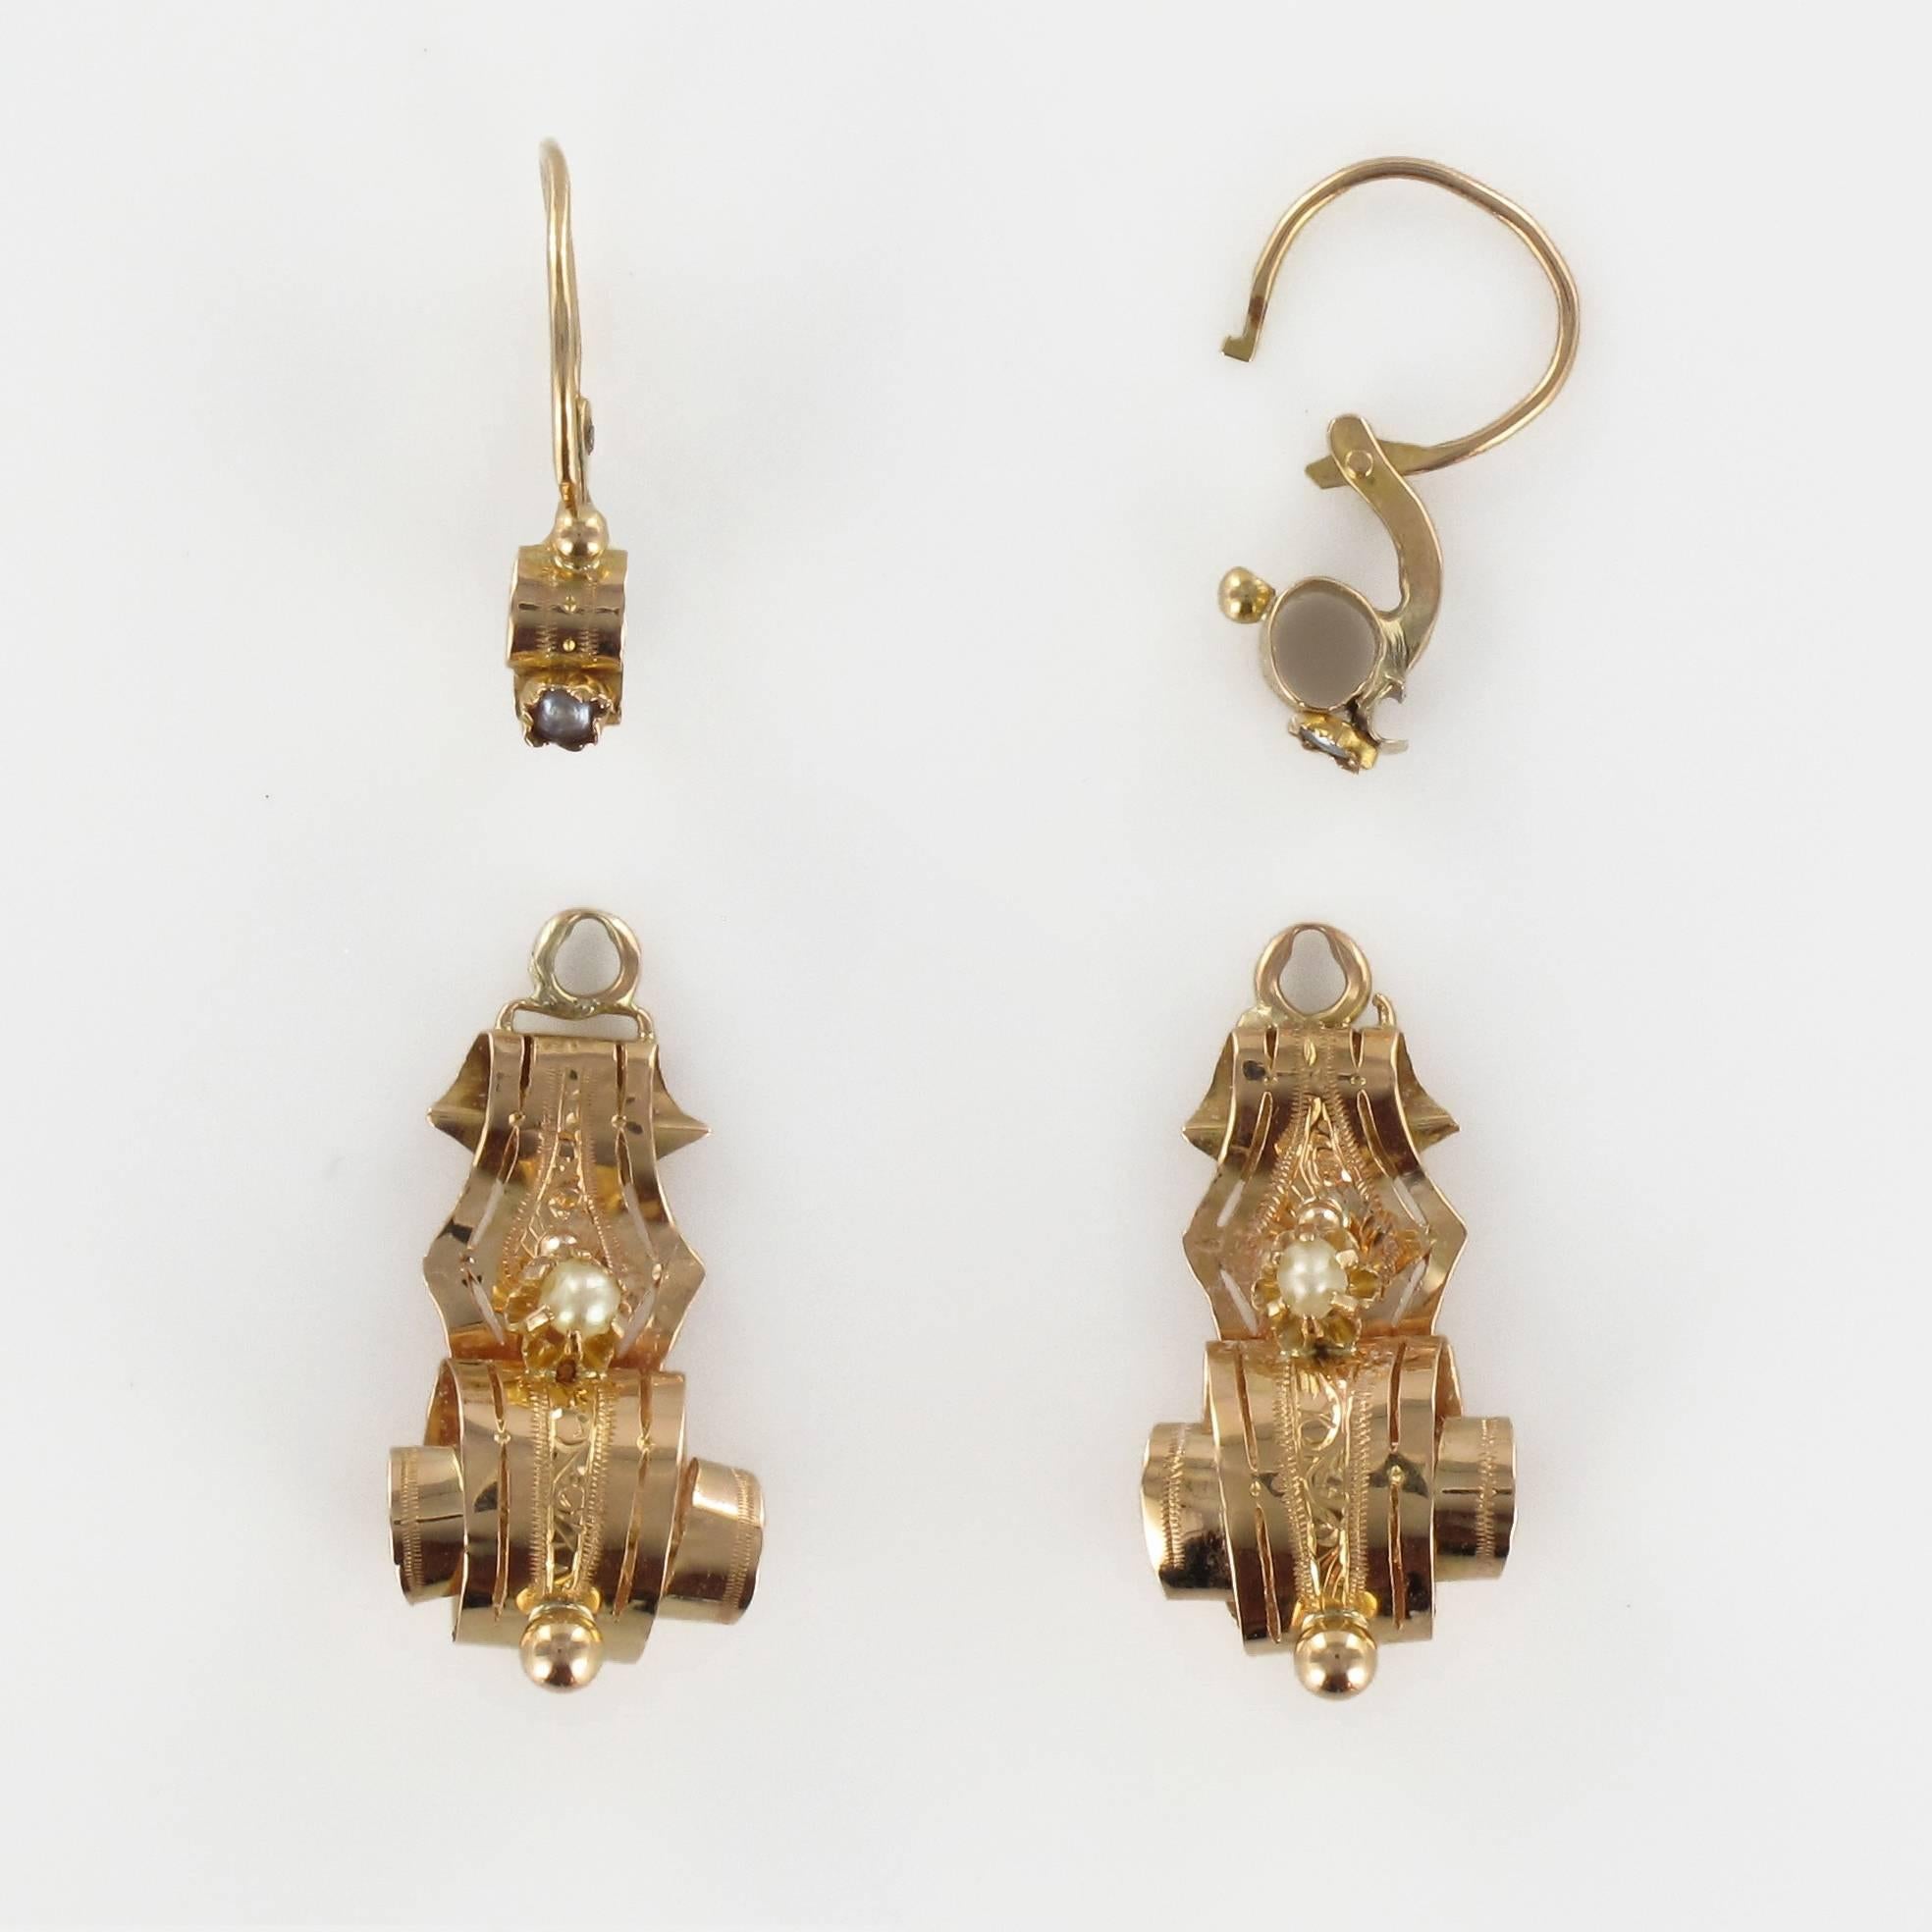 For pierced ears.

Pair of earrings in 18 carat rose gold, eagle head hallmark. 

Each rose gold earring is composed of a decor of windings and set in the center of a fine pearl. A suspended and removable rose gold pendant slips into the clasp